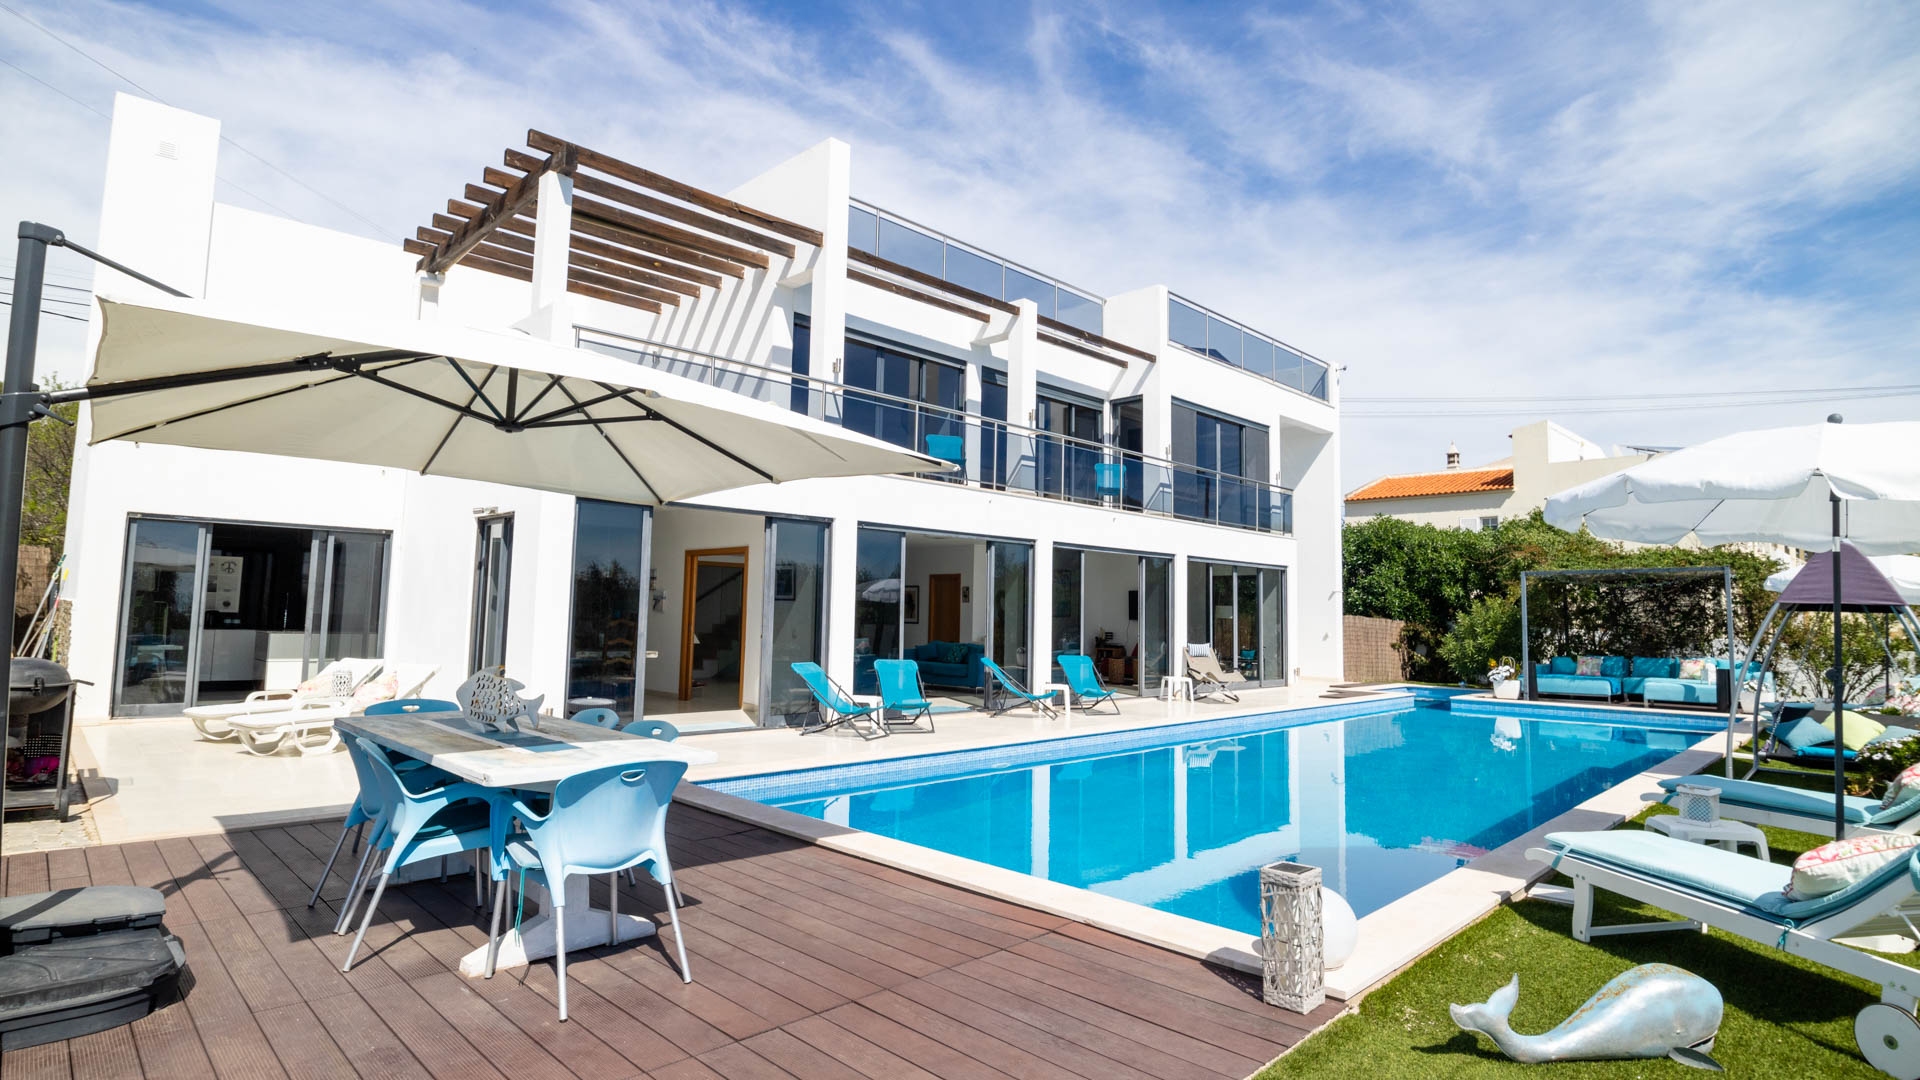 4 Bedroom Contemporary Villa with Sea views near Loulé | VM2079 Modern villa with large pool and sunbathing terraces perfect for holiday rental with AL licence. Short distance to golf, shopping, beaches, and airport